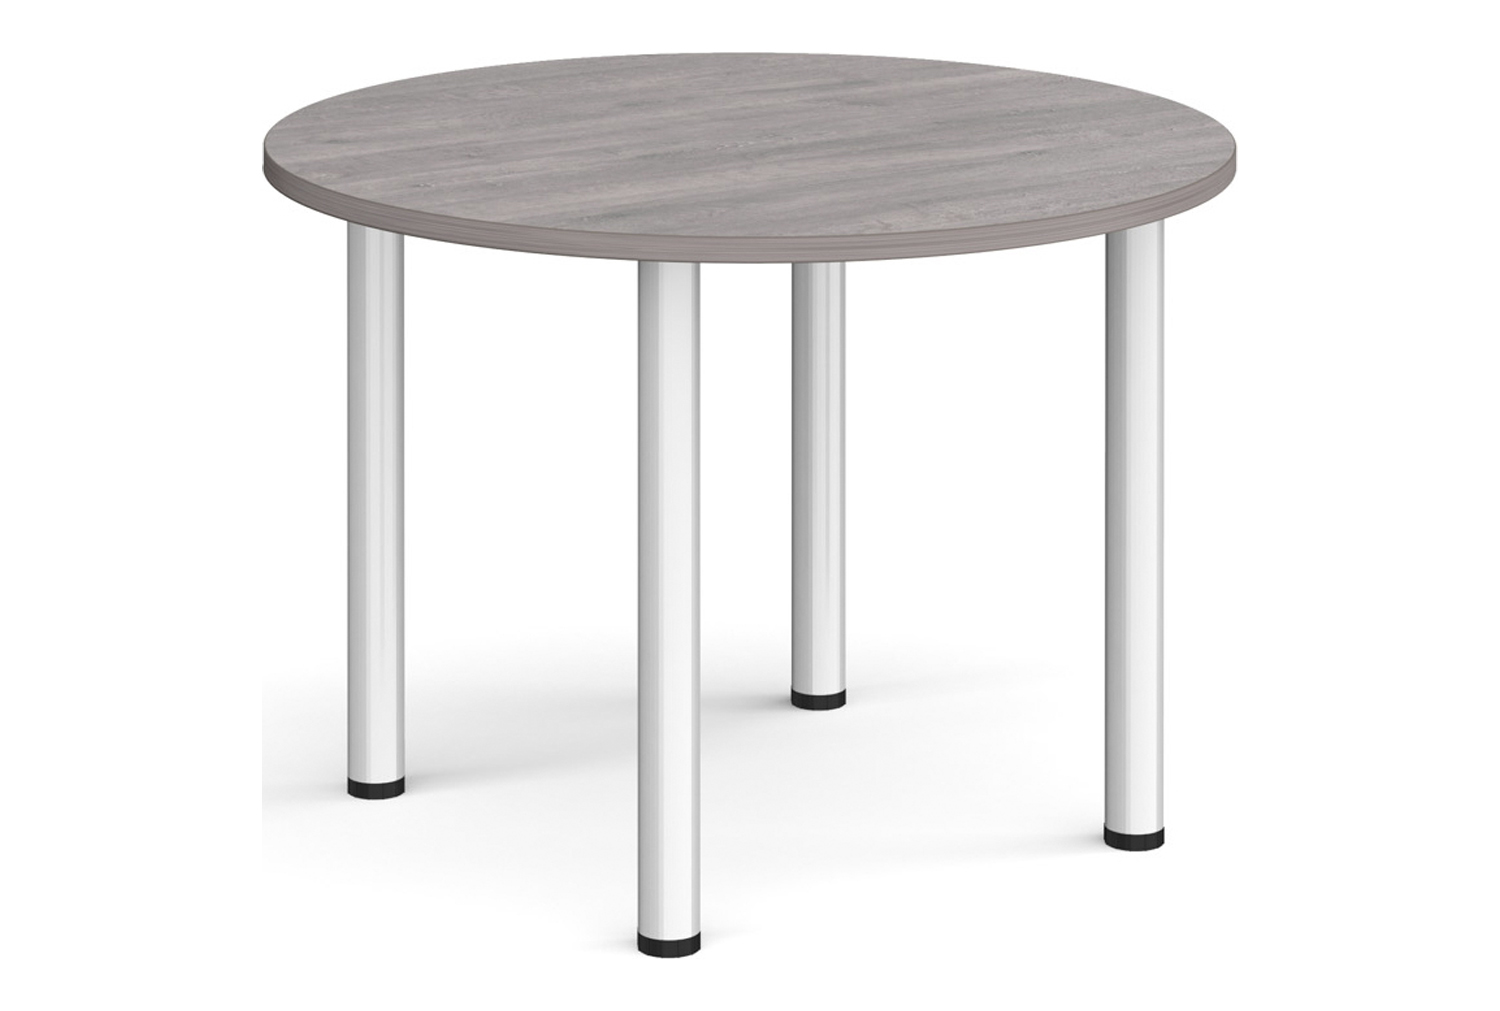 Bowers Round Meeting Table, 100diax73h (cm), Grey Oak